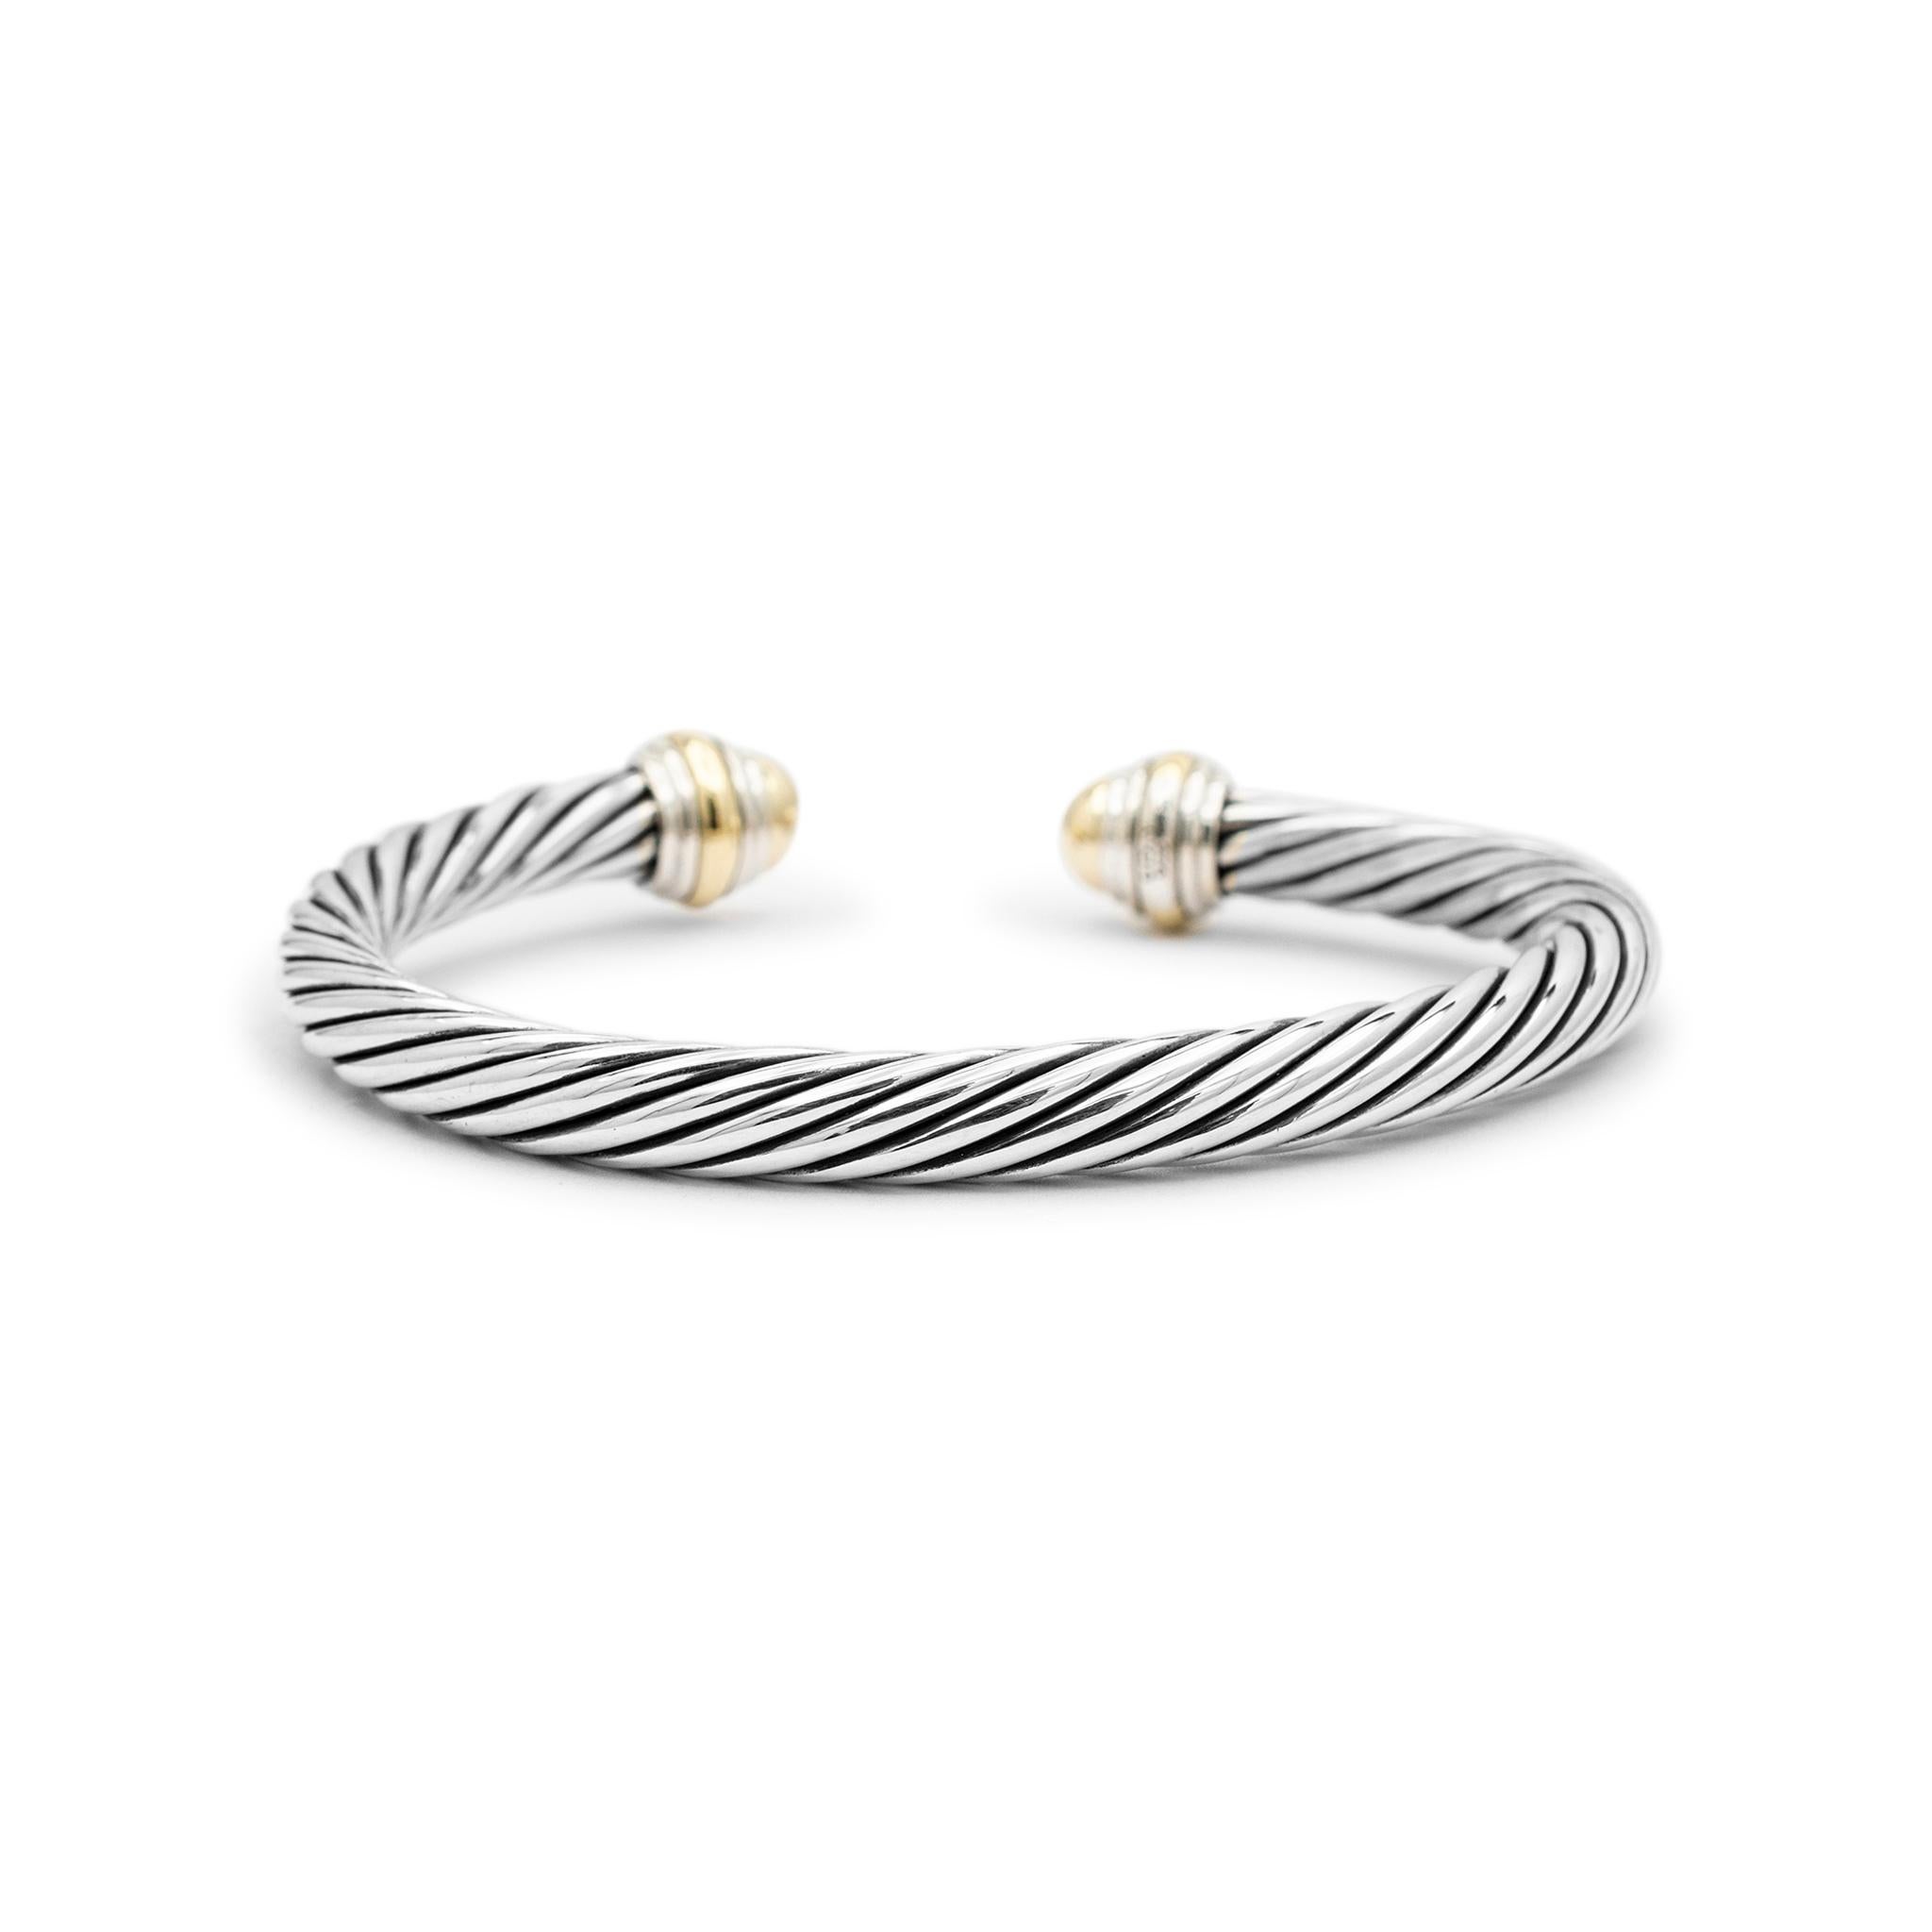 Brand: David Yurman

Metal Type: 925 Sterling Silver 14K Yellow Gold

Length: 7.50 Inches

Width: 7.00 mm

Weight: 48.00 grams

14K yellow gold and silver cuff bracelet. Engraved with 